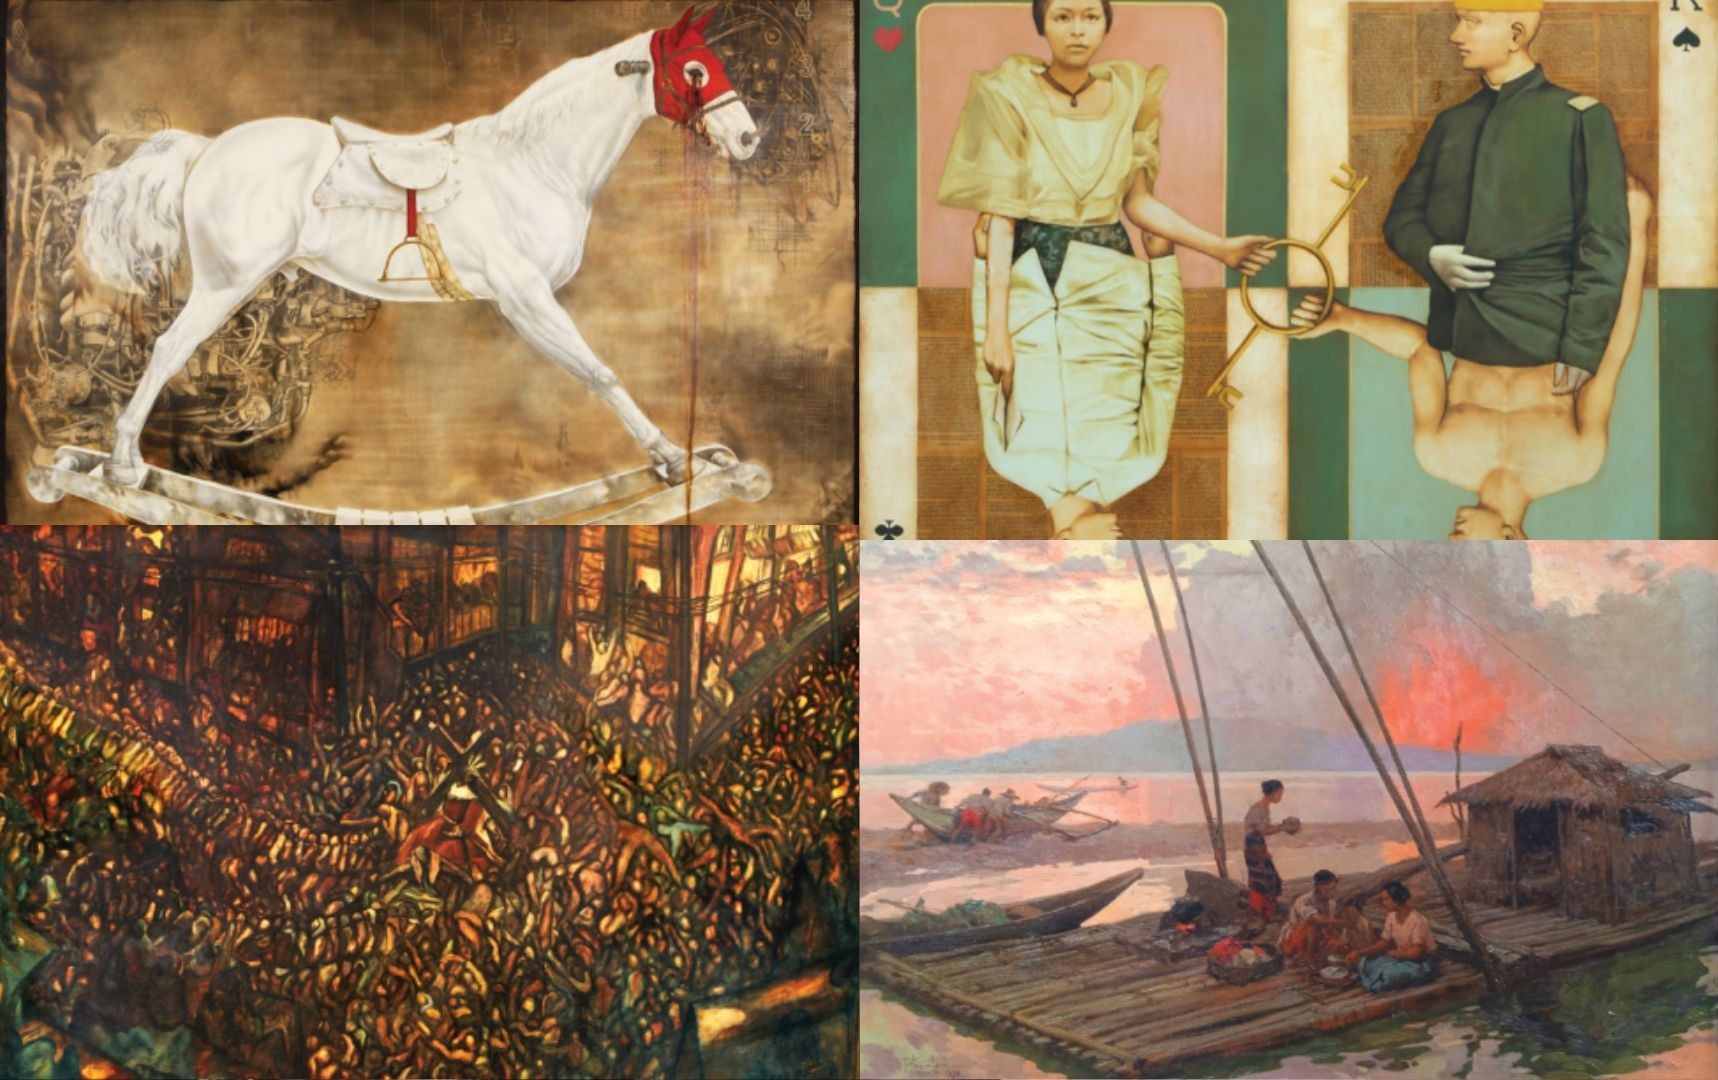 Filipino artists mark new record-breaking auction results, exhibitions